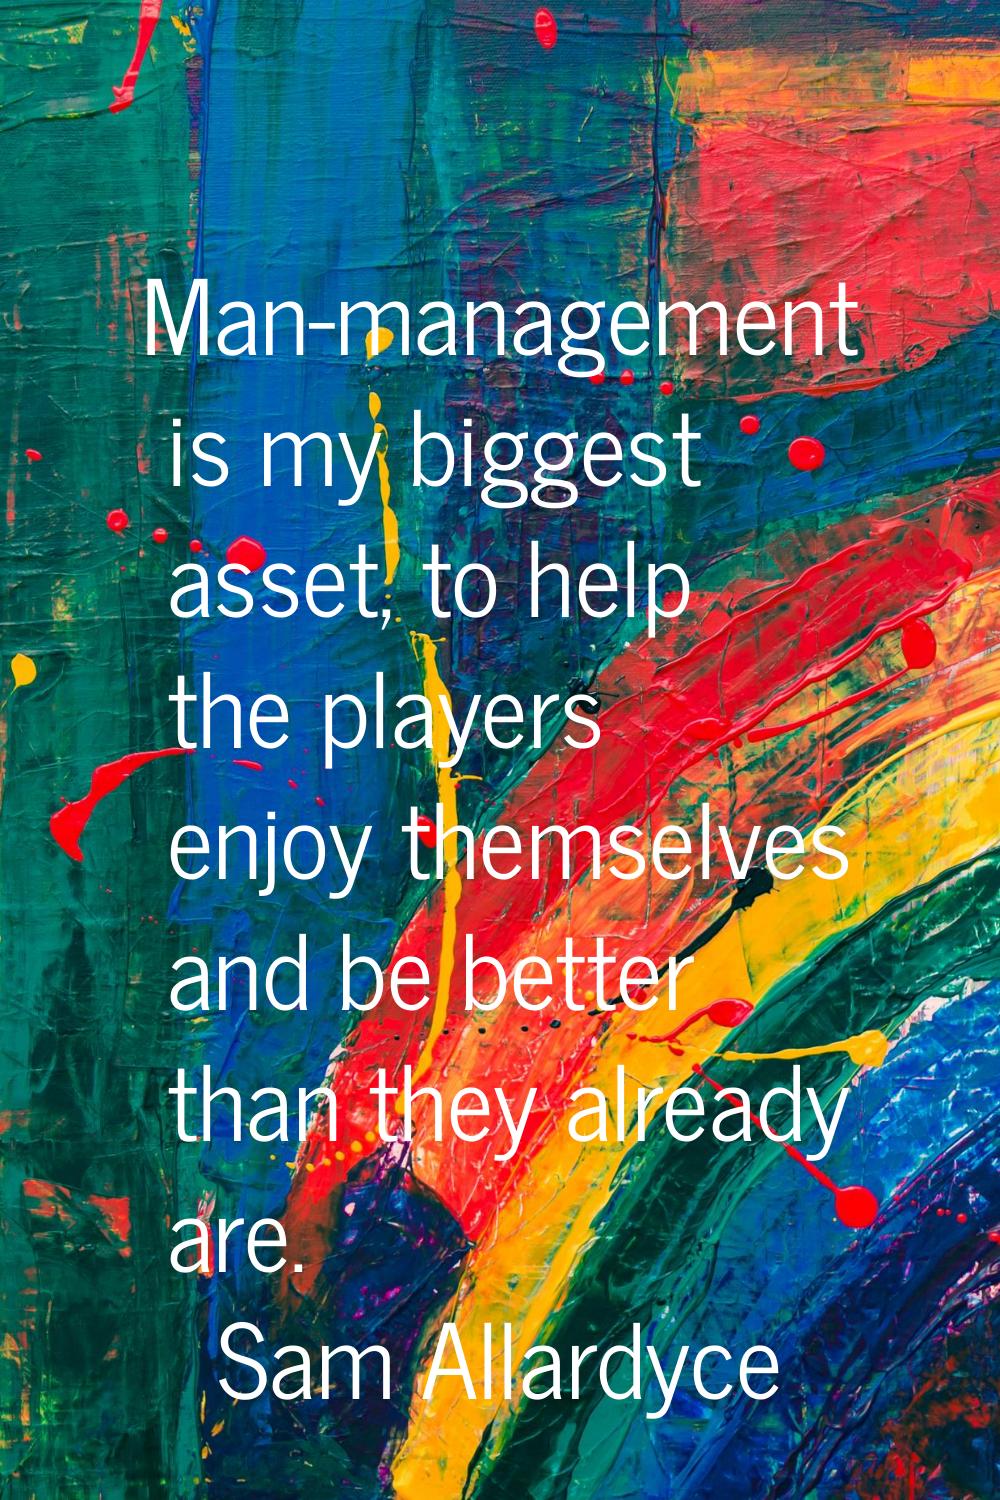 Man-management is my biggest asset, to help the players enjoy themselves and be better than they al